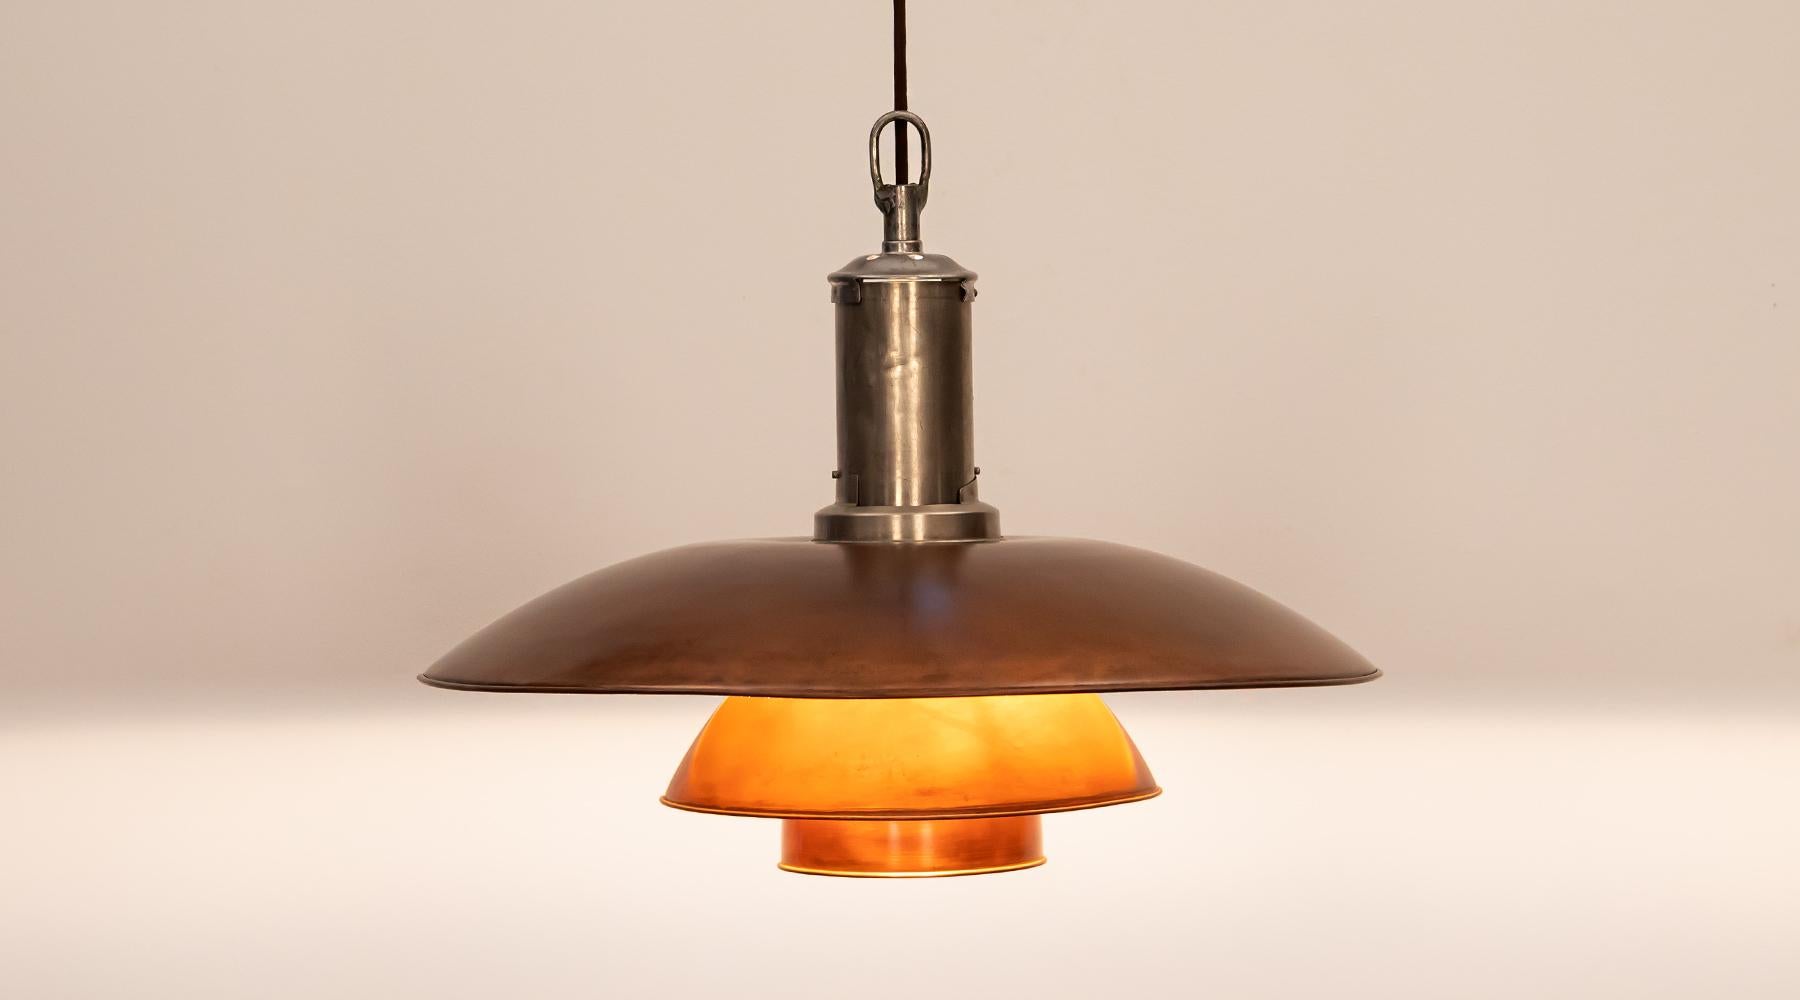 Poul Henningsen, Ceiling lamp 6/5, copper, Denmark, 1940.

Ceiling lamp of Poul Henningsen pendants with copper shades and nickel-plated fitment gives a soft, warm light. Designed by Poul Henningsen in the 1940s. He designed several versions of